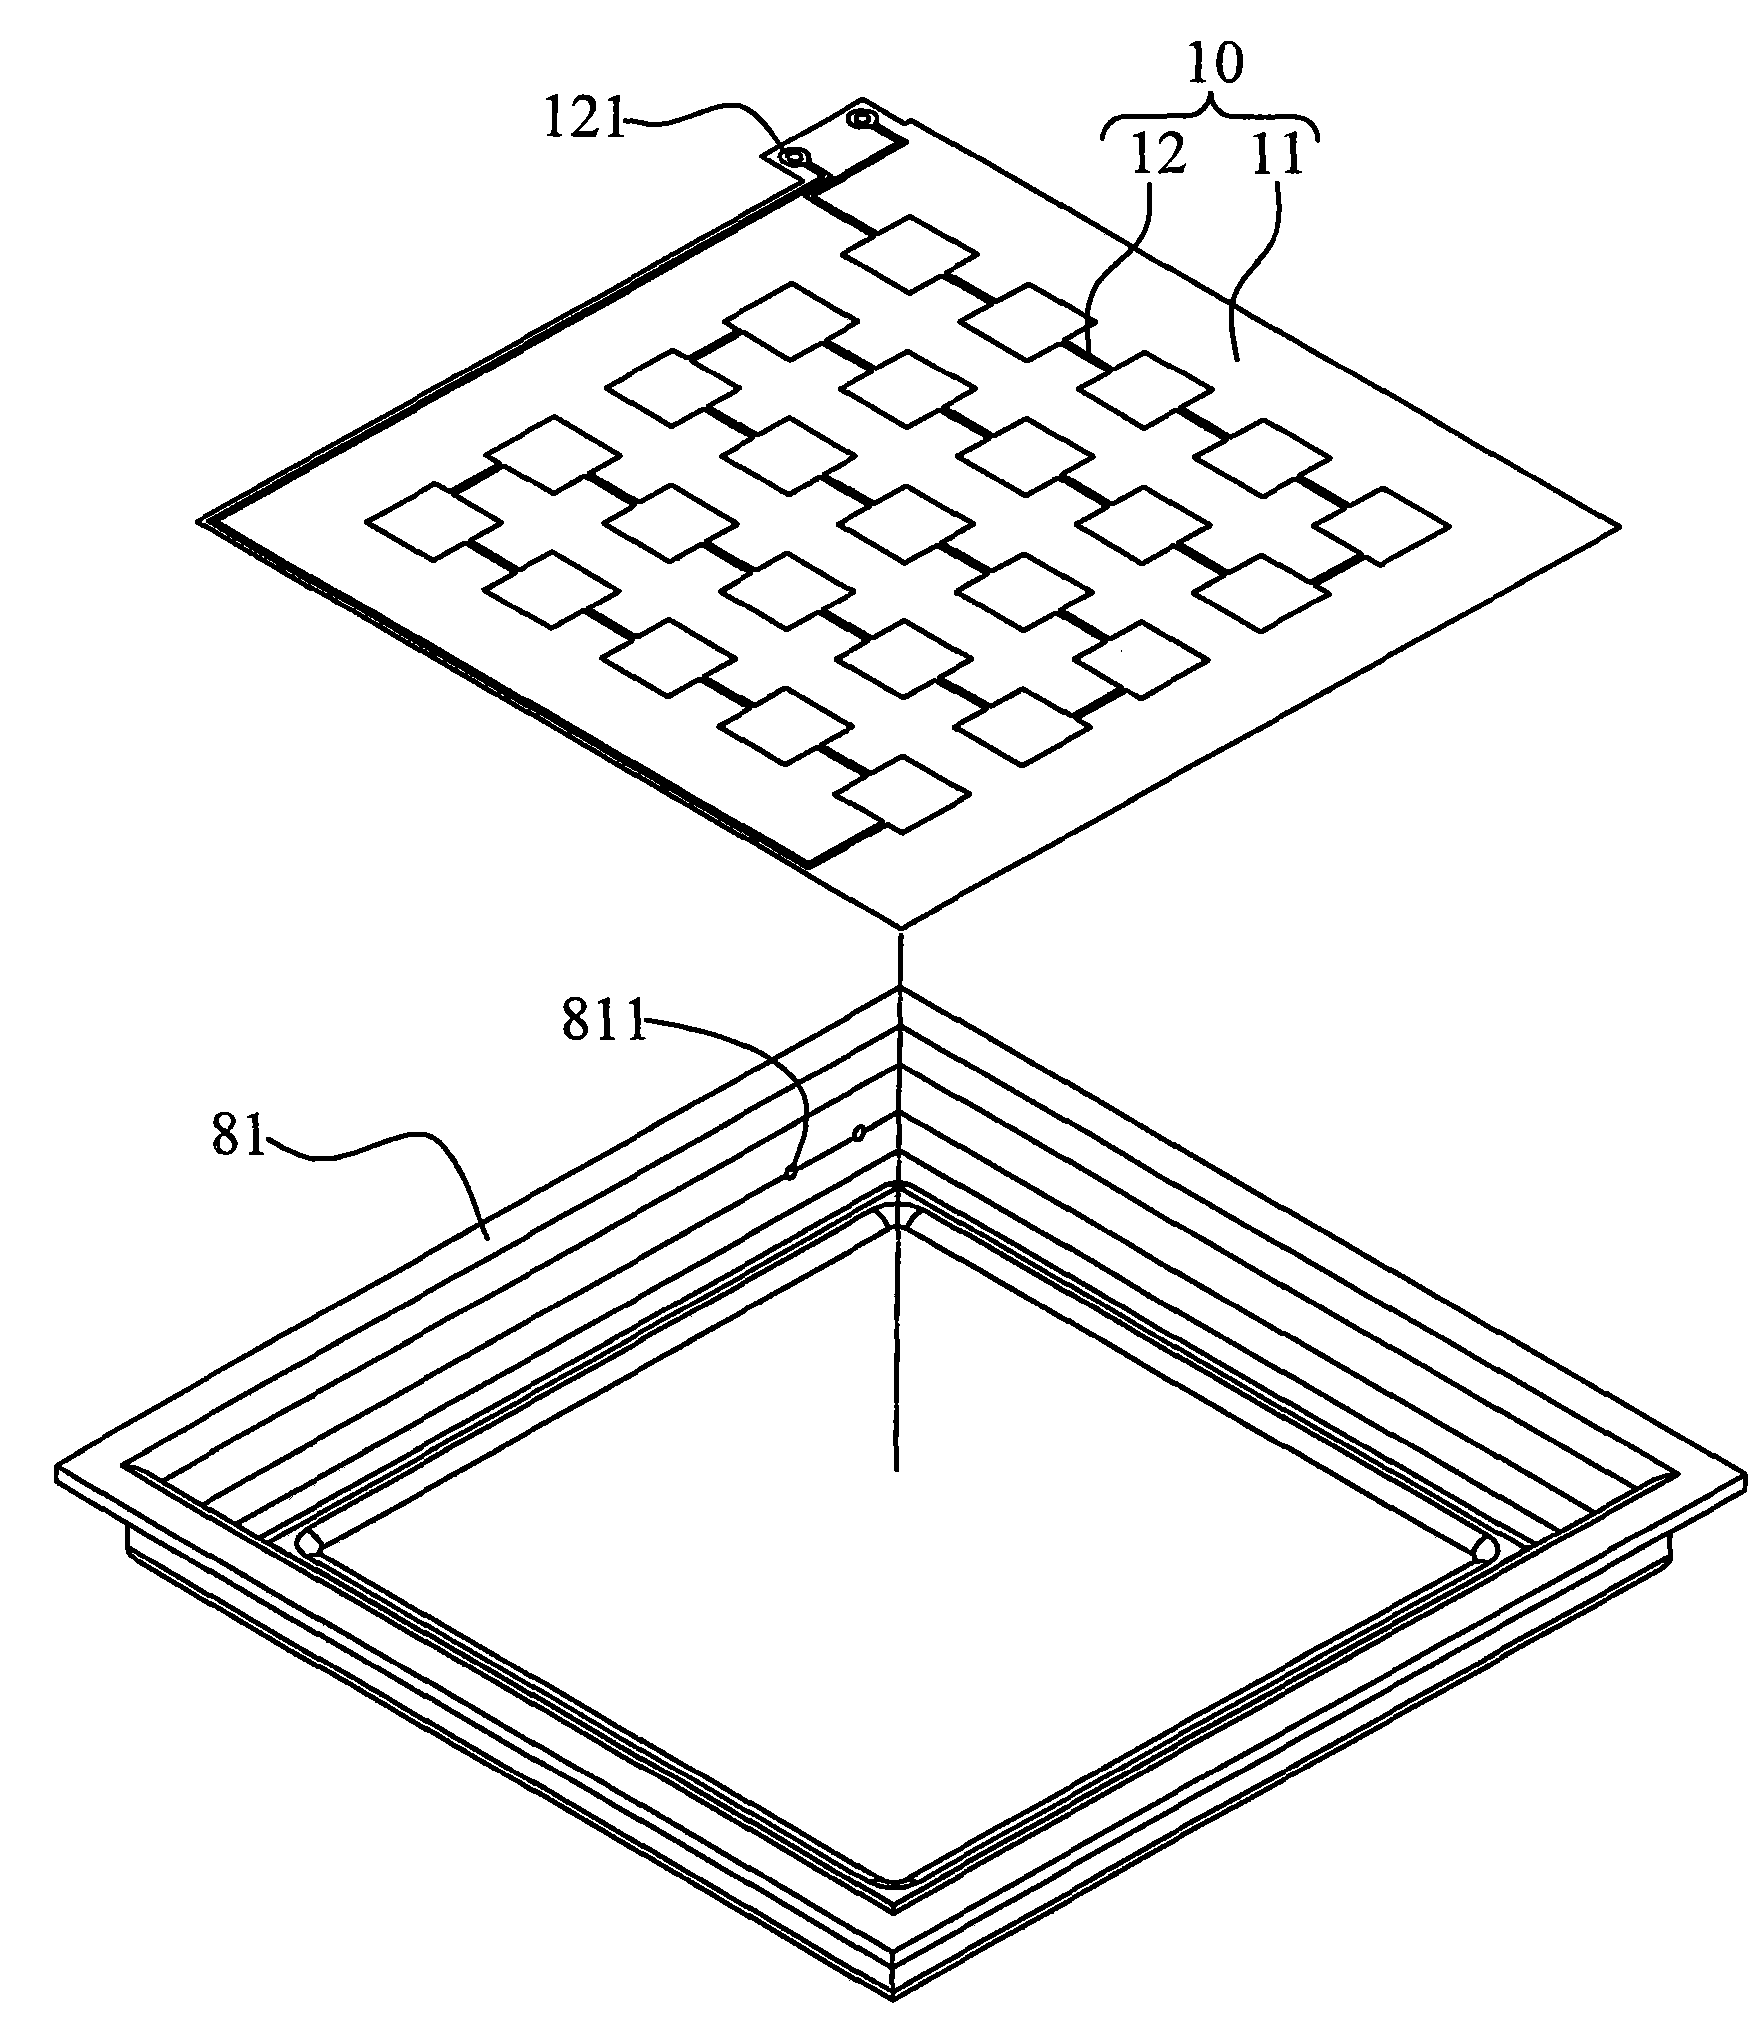 Conductive coating structure for lighting device